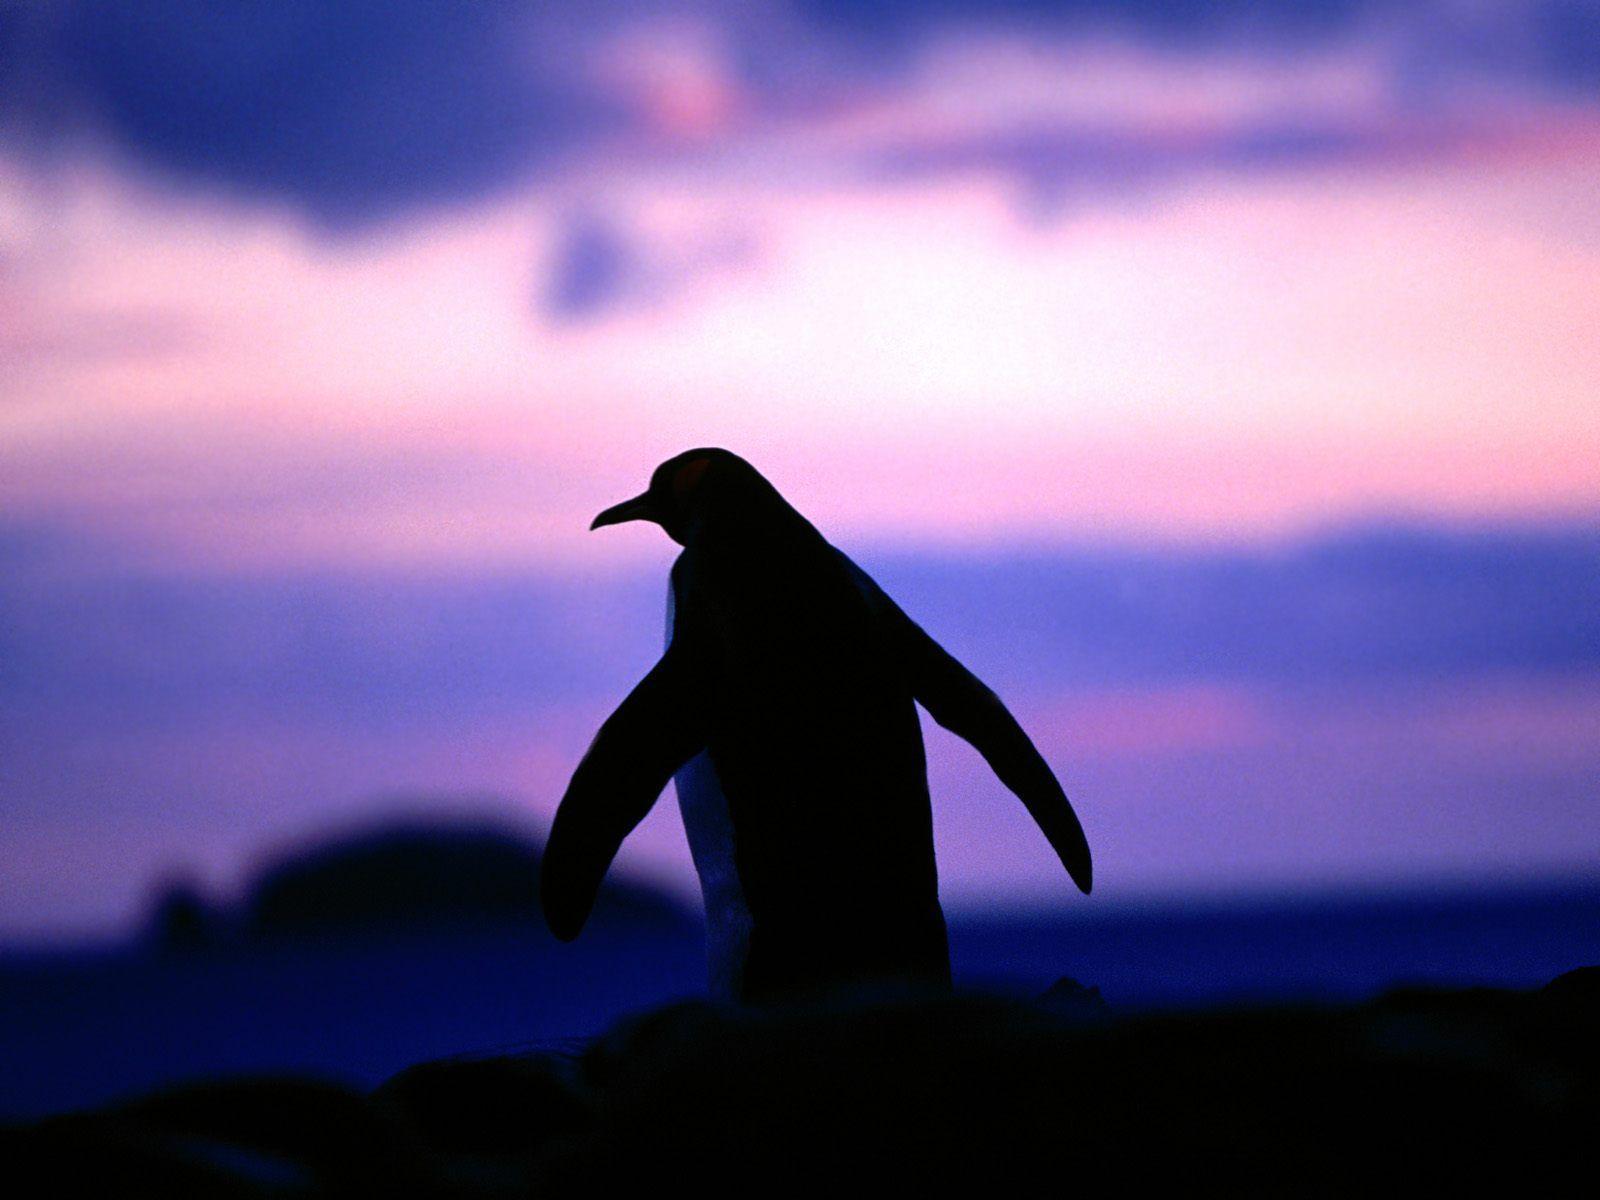 Penguin Wallpapers for Your Computer